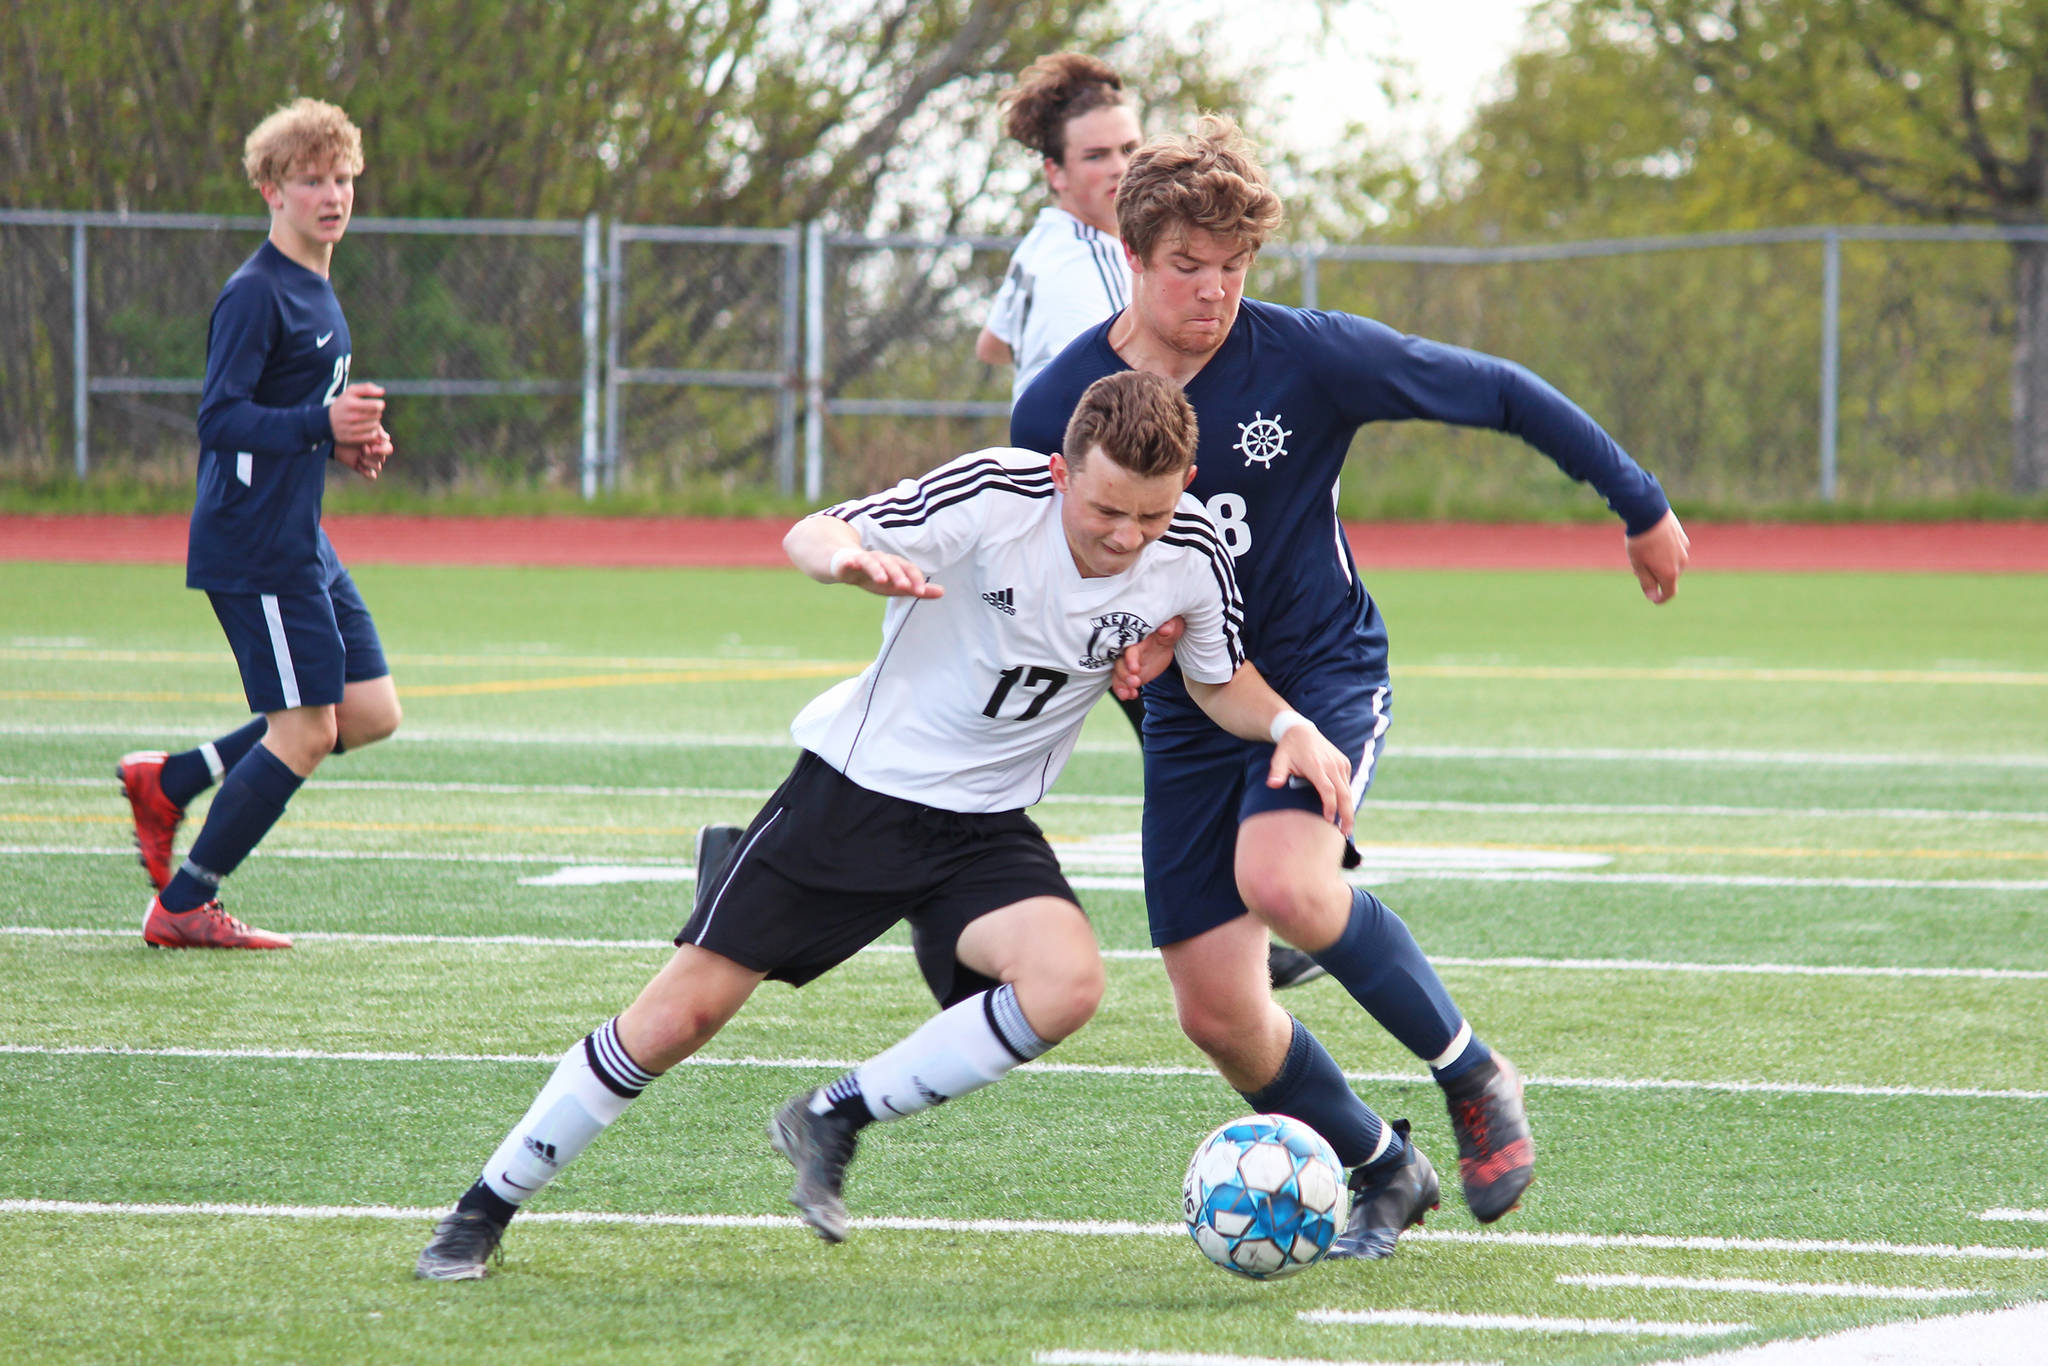 Homer’s Phinny Weston (right) and Kenai’s Travis Verkuilen battle for the ball during the championship boys soccer game of the Peninsula Conference Tournament on Saturday, May 18, 2019 at Homer High School in Homer, Alaska. The Mariners won 1-0. (Photo by Megan Pacer/Homer News)